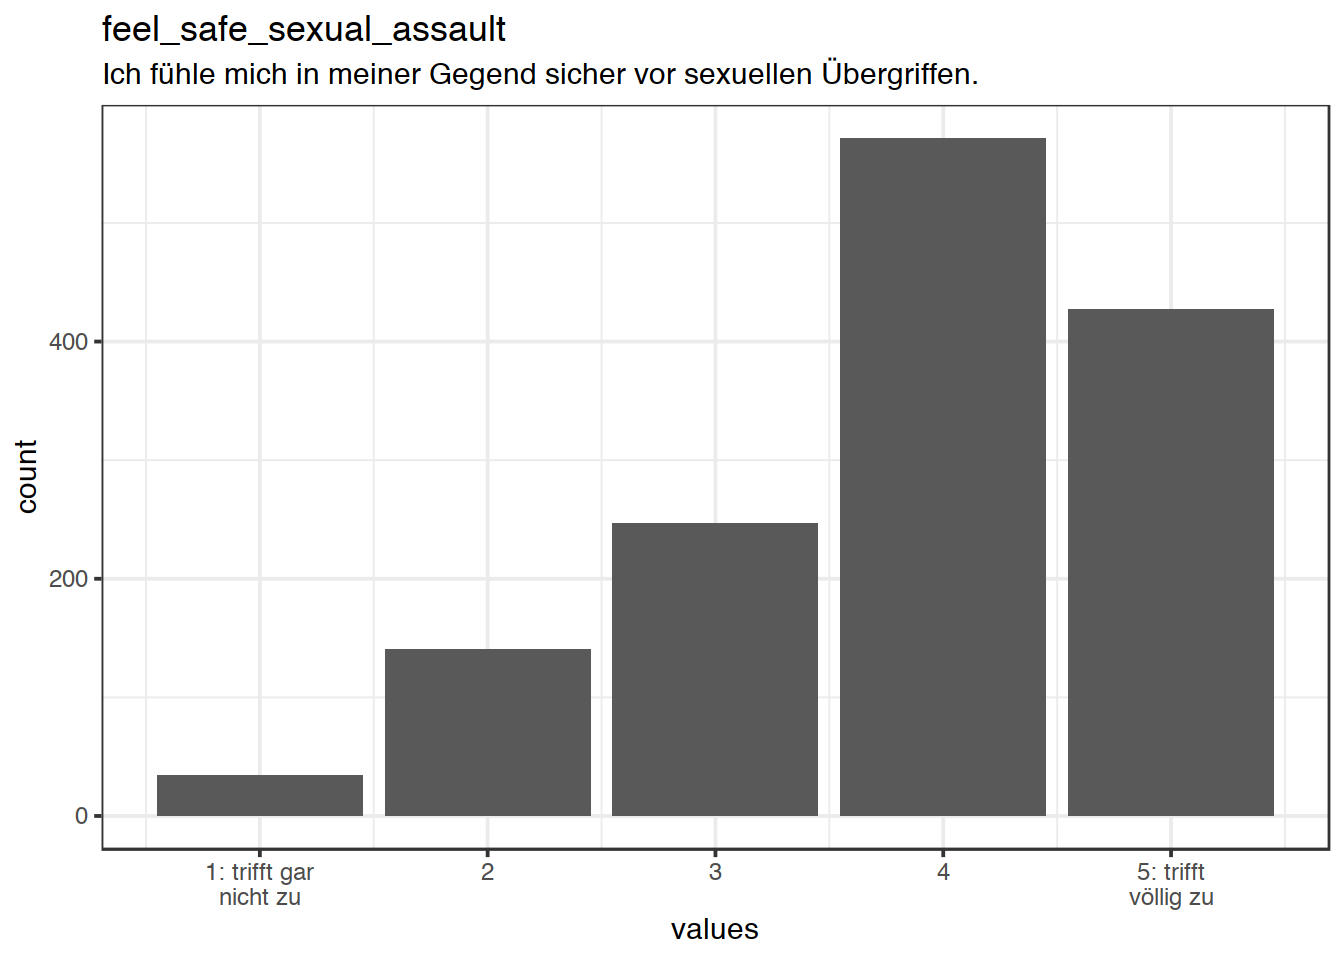 Distribution of values for feel_safe_sexual_assault